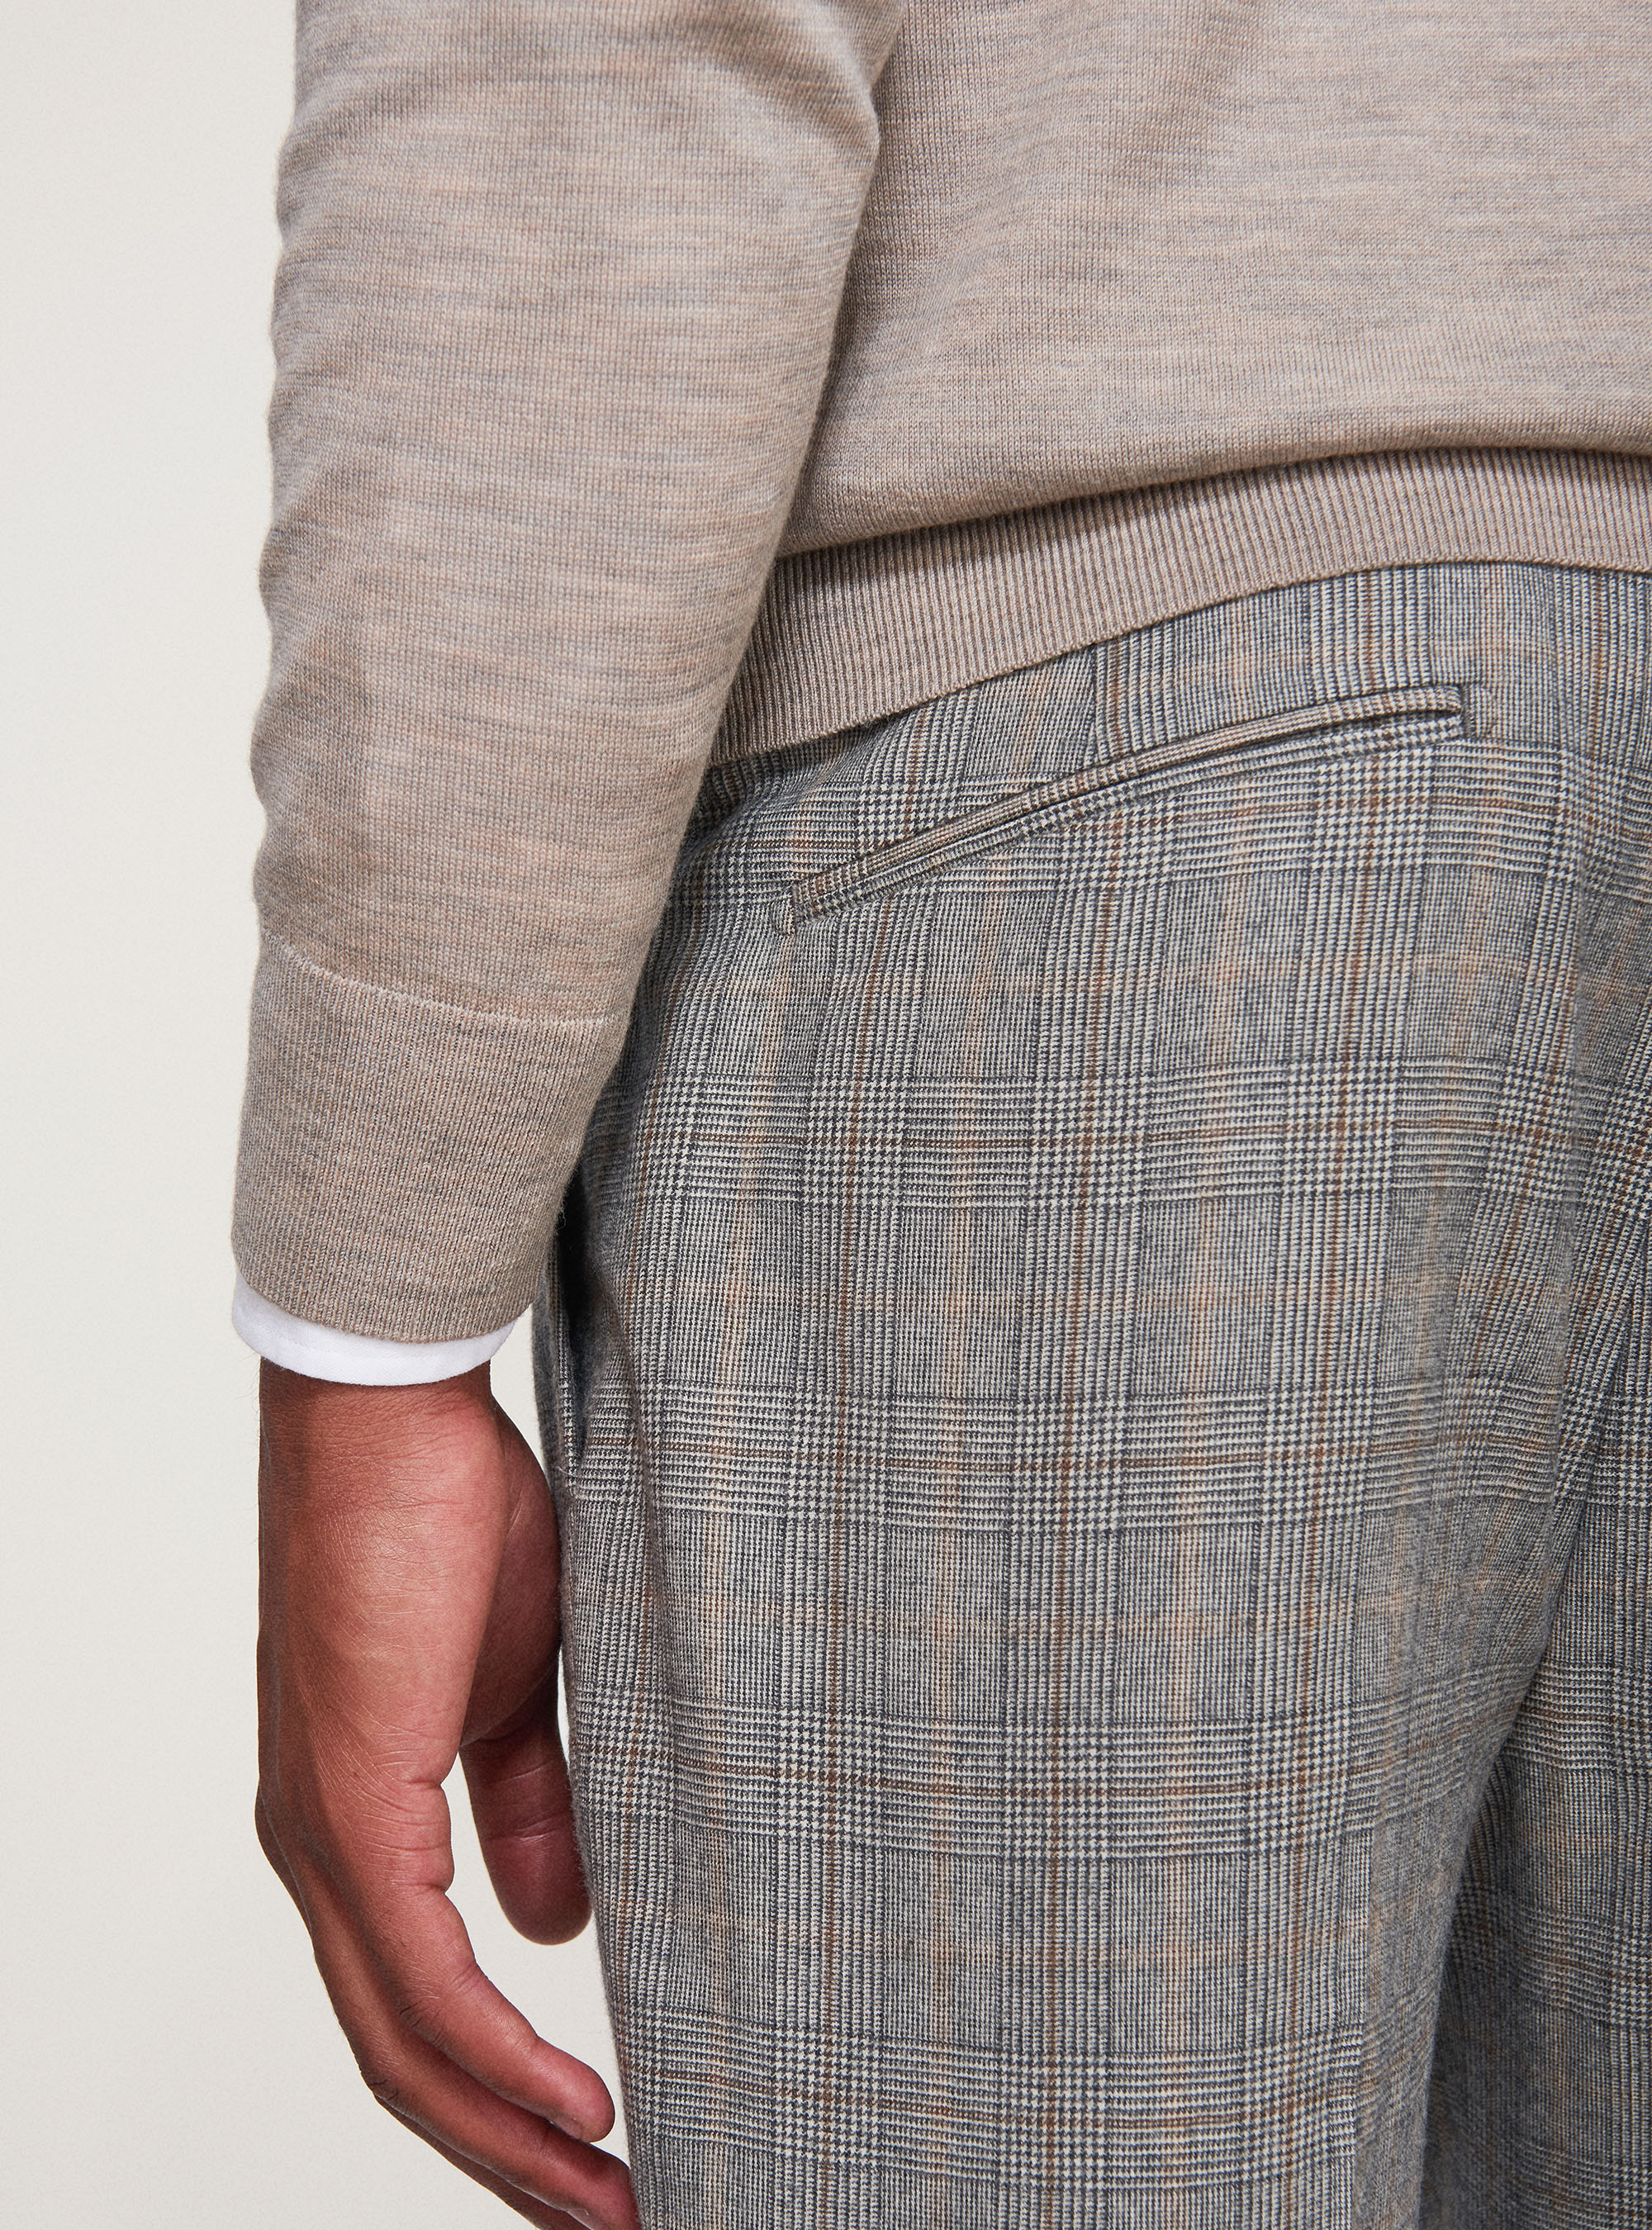 Prince of Wales suit trousers in superfine 120's wool | GutteridgeUS |  Suits Uomo